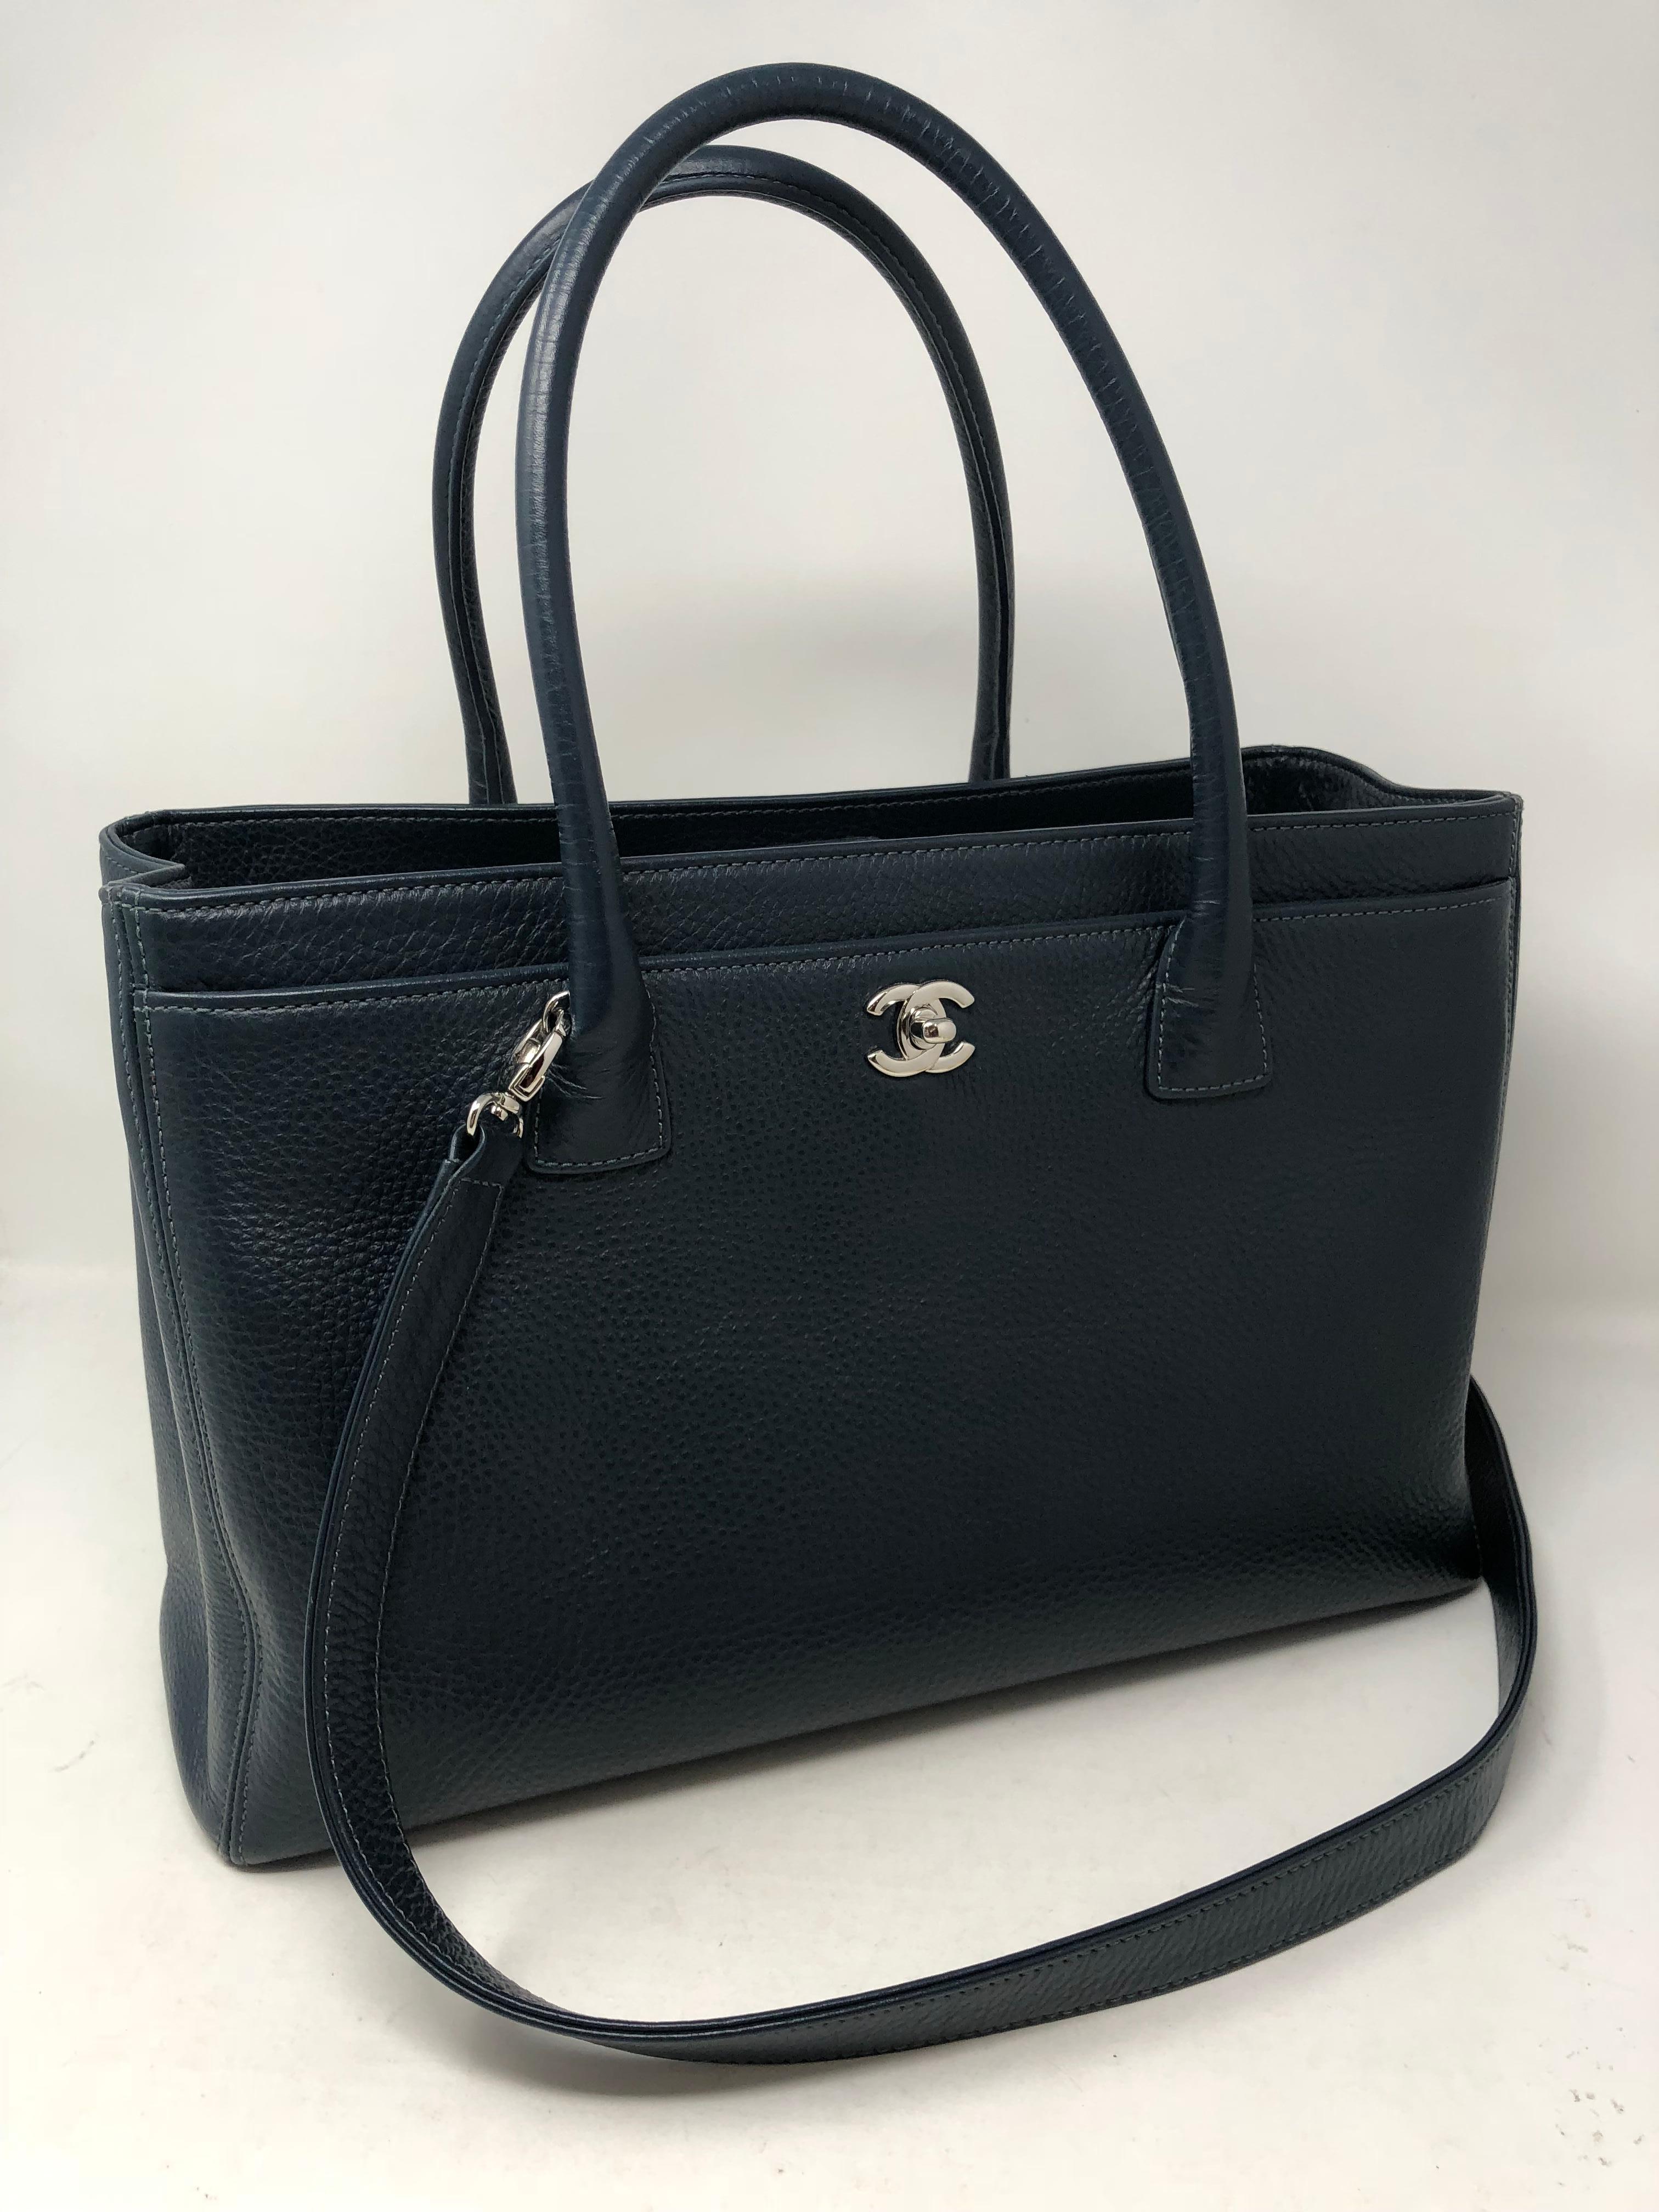 Chanel Blue Cerf Tote. Retired style from Chanel that includes an adjustable strap. Dark blue color that is beautiful. Can be worn without. Like new condition. Silver hardware. A classic style by Chanel. Guaranteed authentic. 